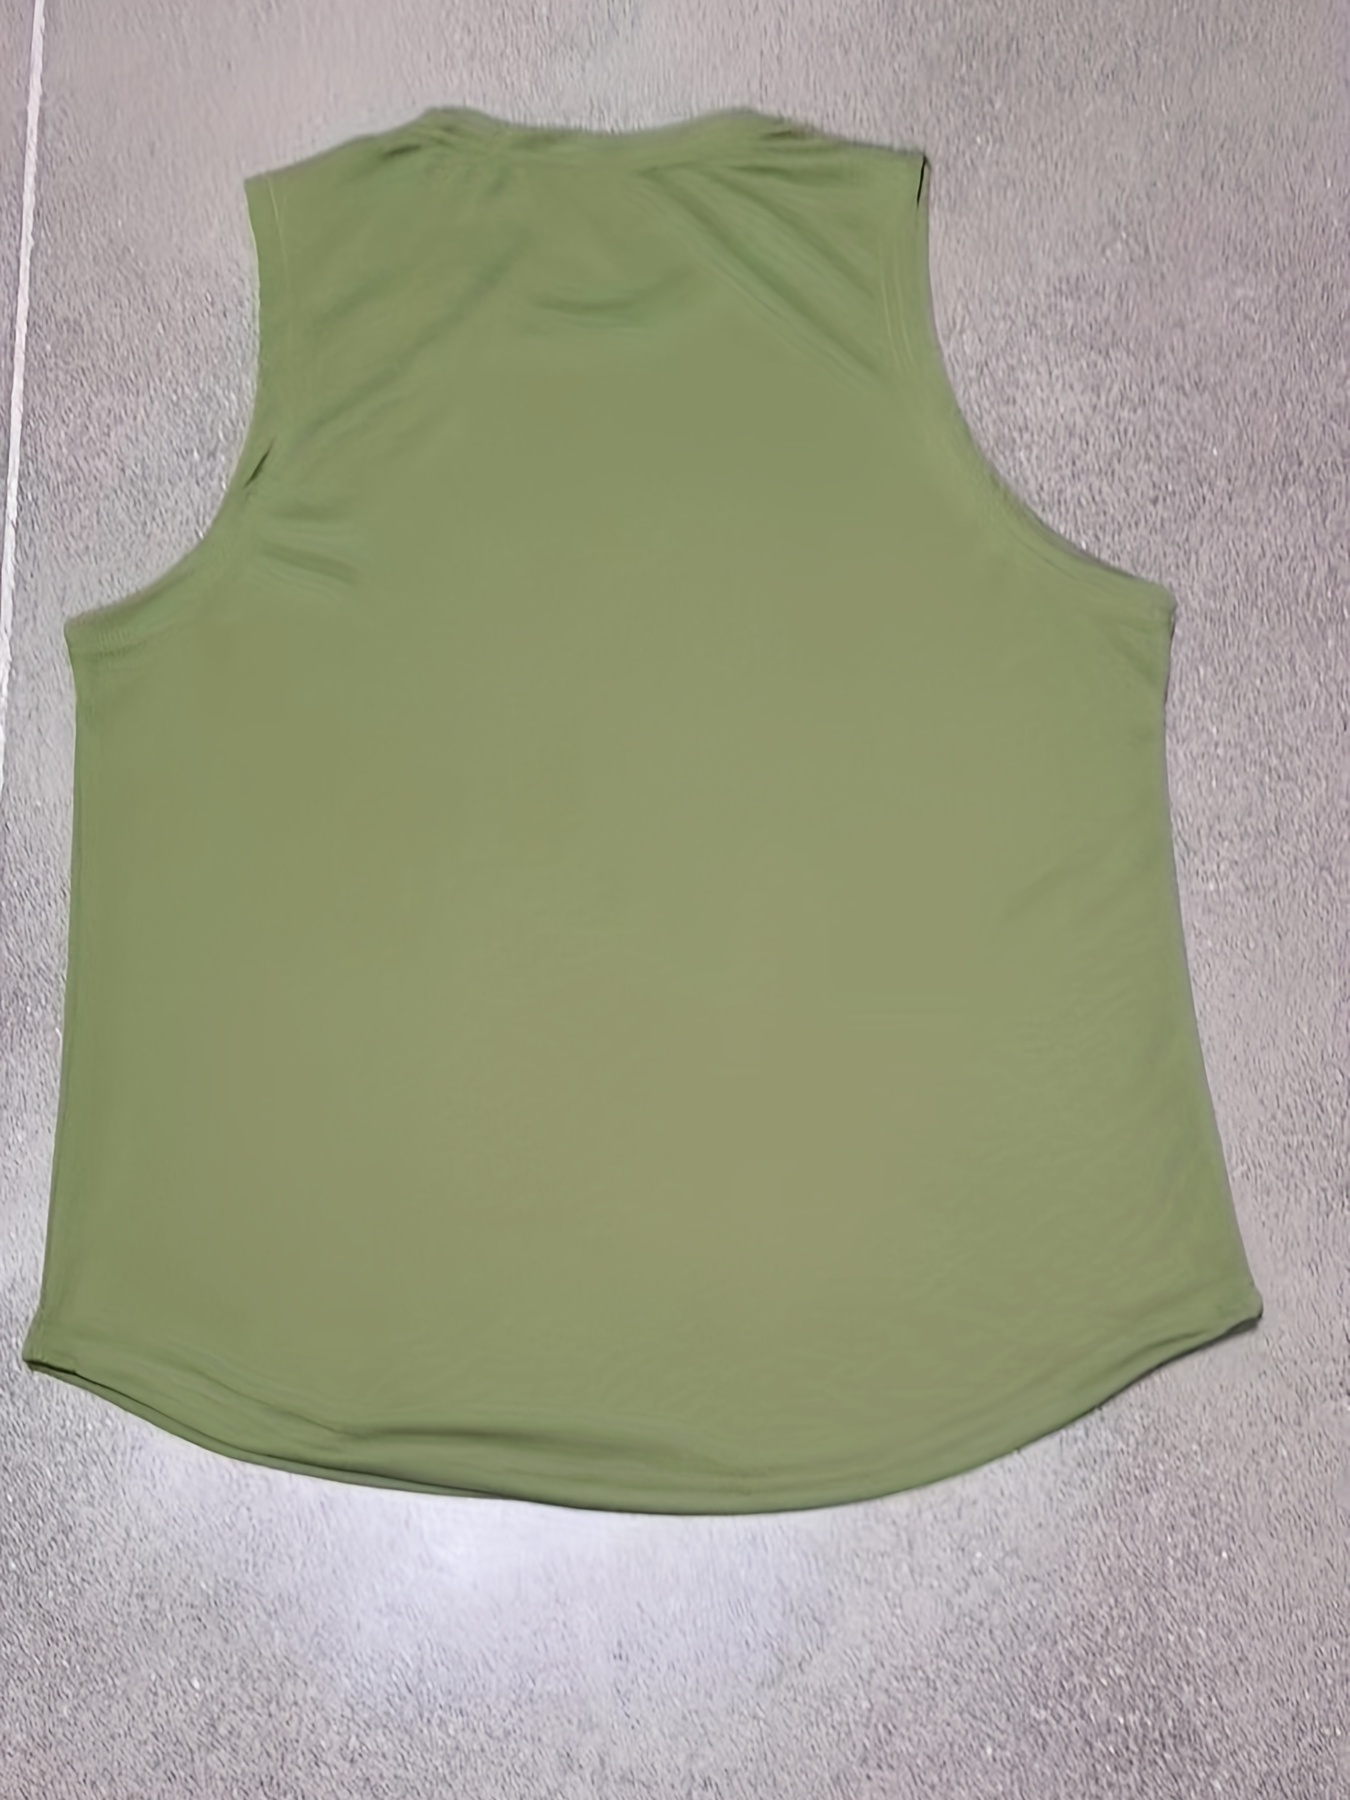  Lanliun See Through Sleeveless Tank Tops for Men Casual Unique  Workout Outdoor T Shirts Gym Muscle Shirts ArmyGreen : Clothing, Shoes &  Jewelry